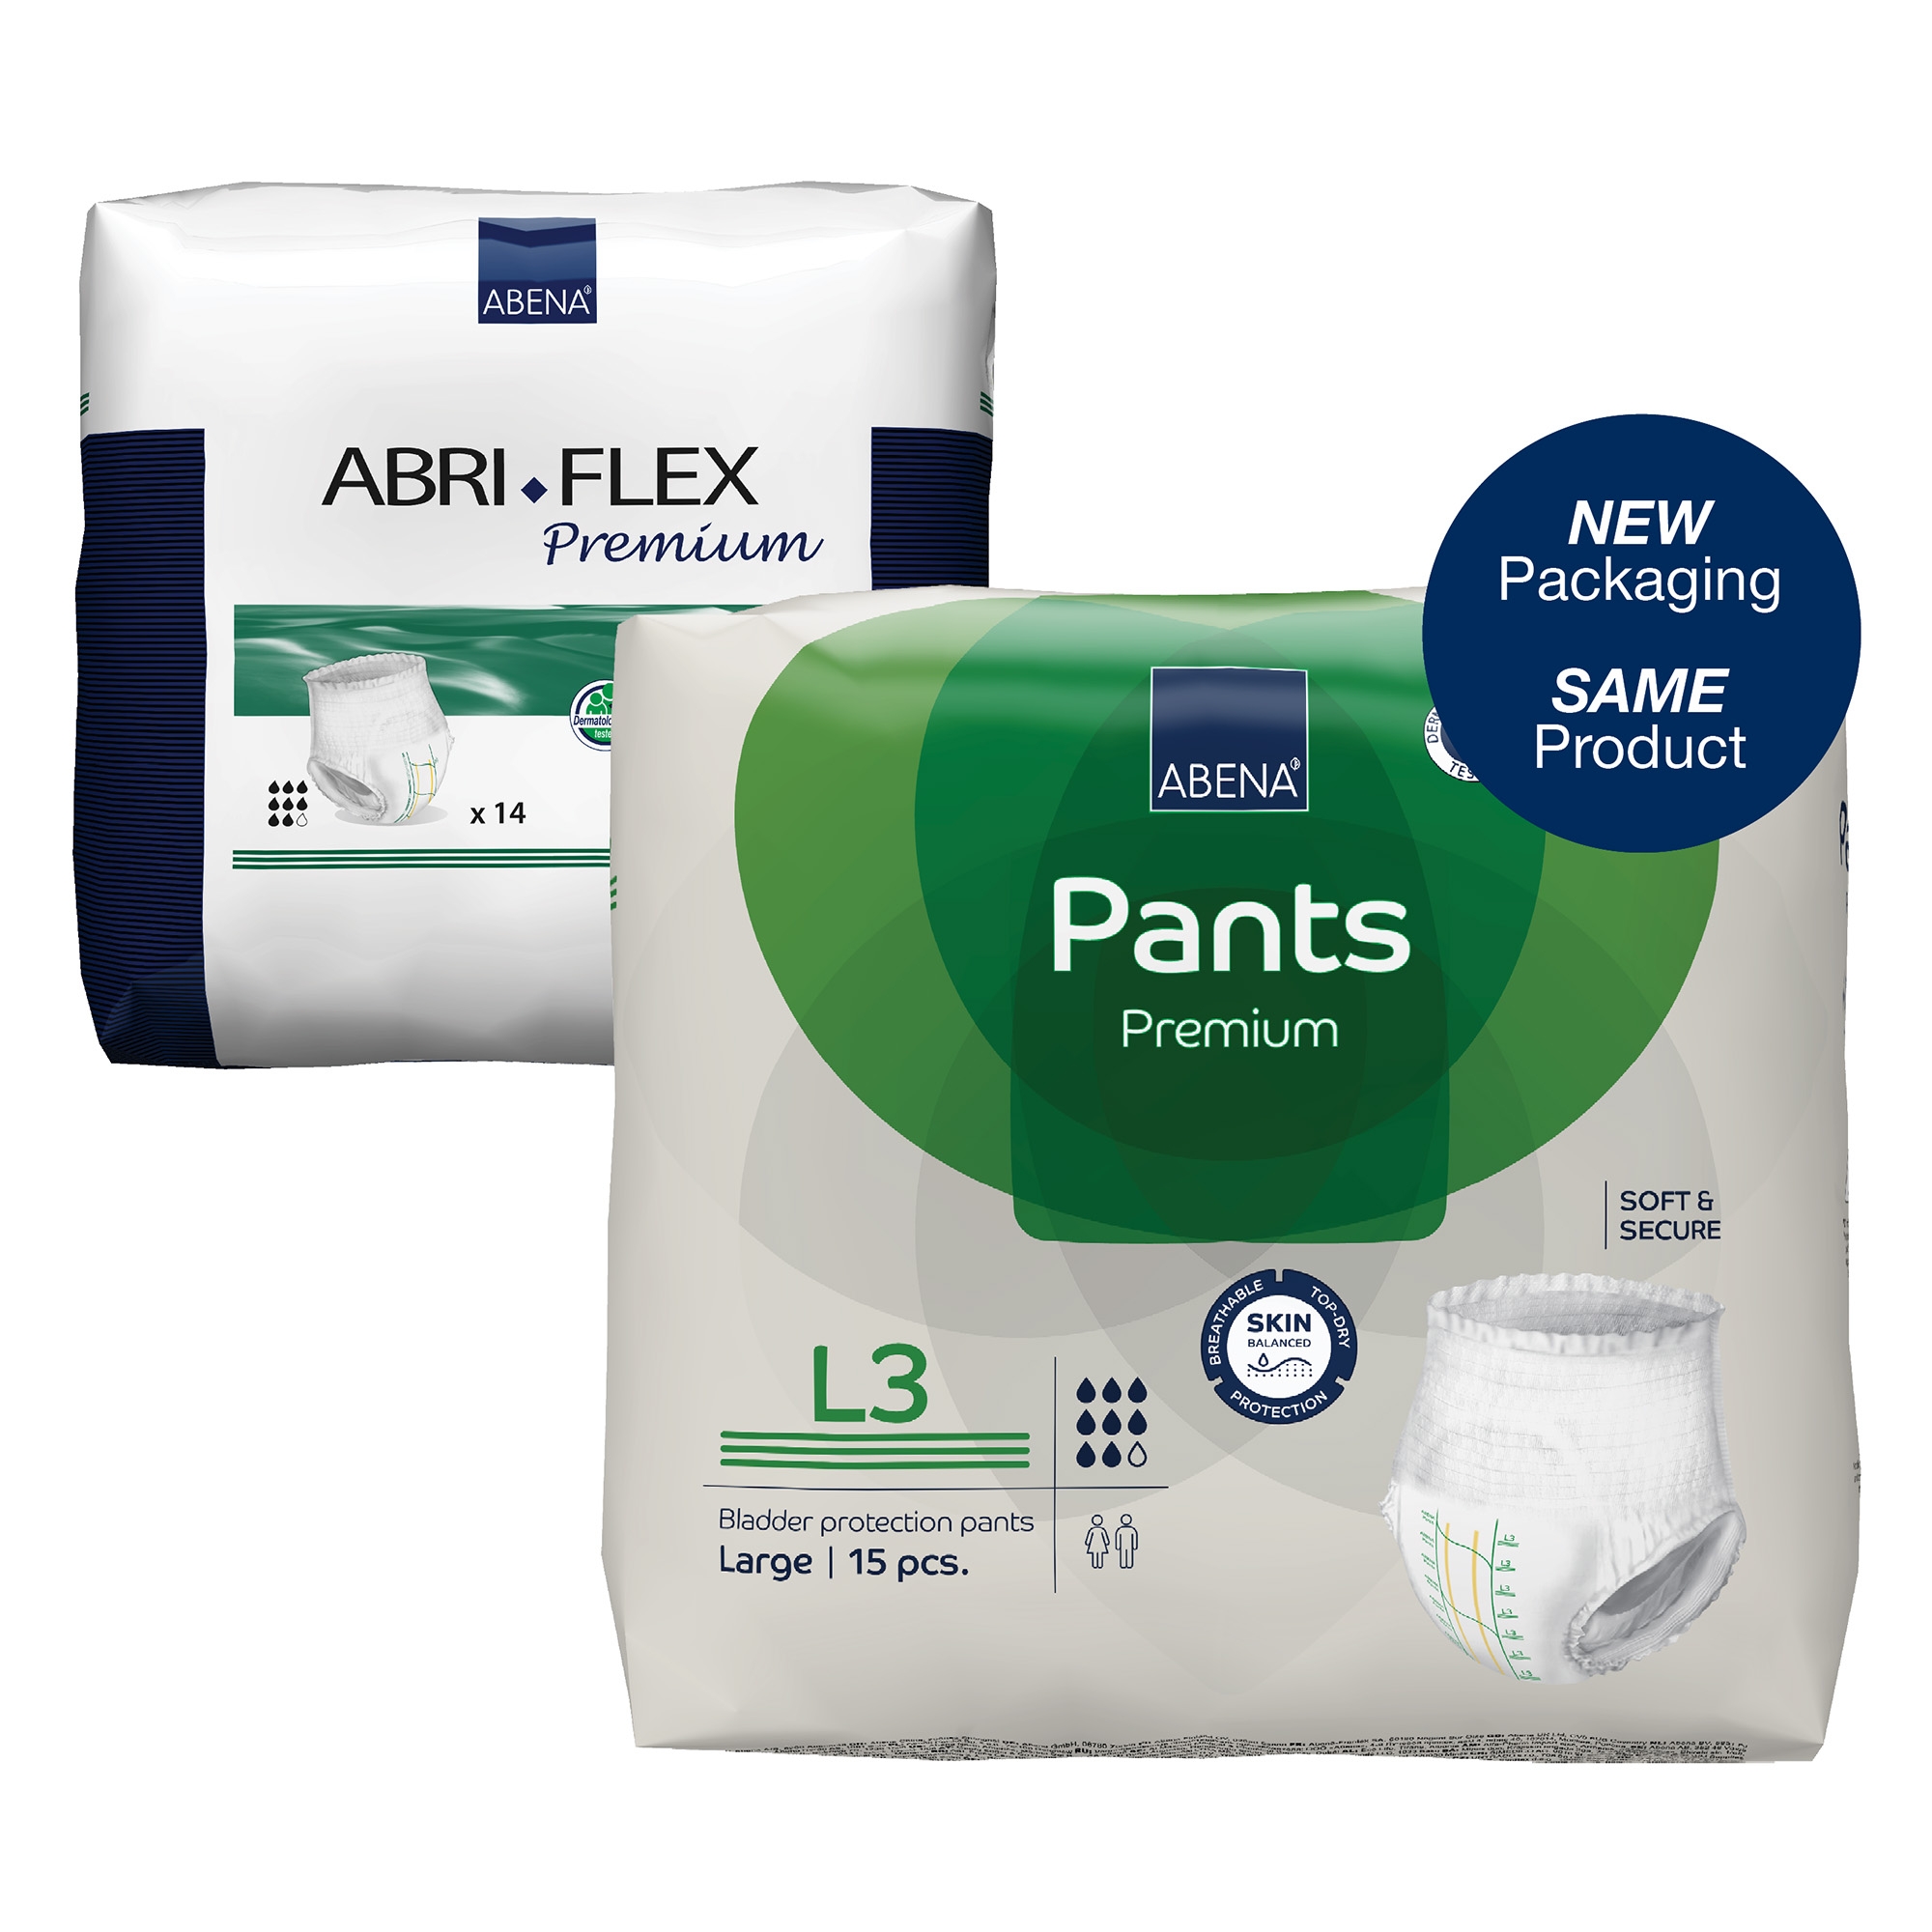 Abena Premium Pants L3 Disposable Underwear Pull On with Tear Away Seams Large, 1000021327, 90 Ct - image 2 of 7